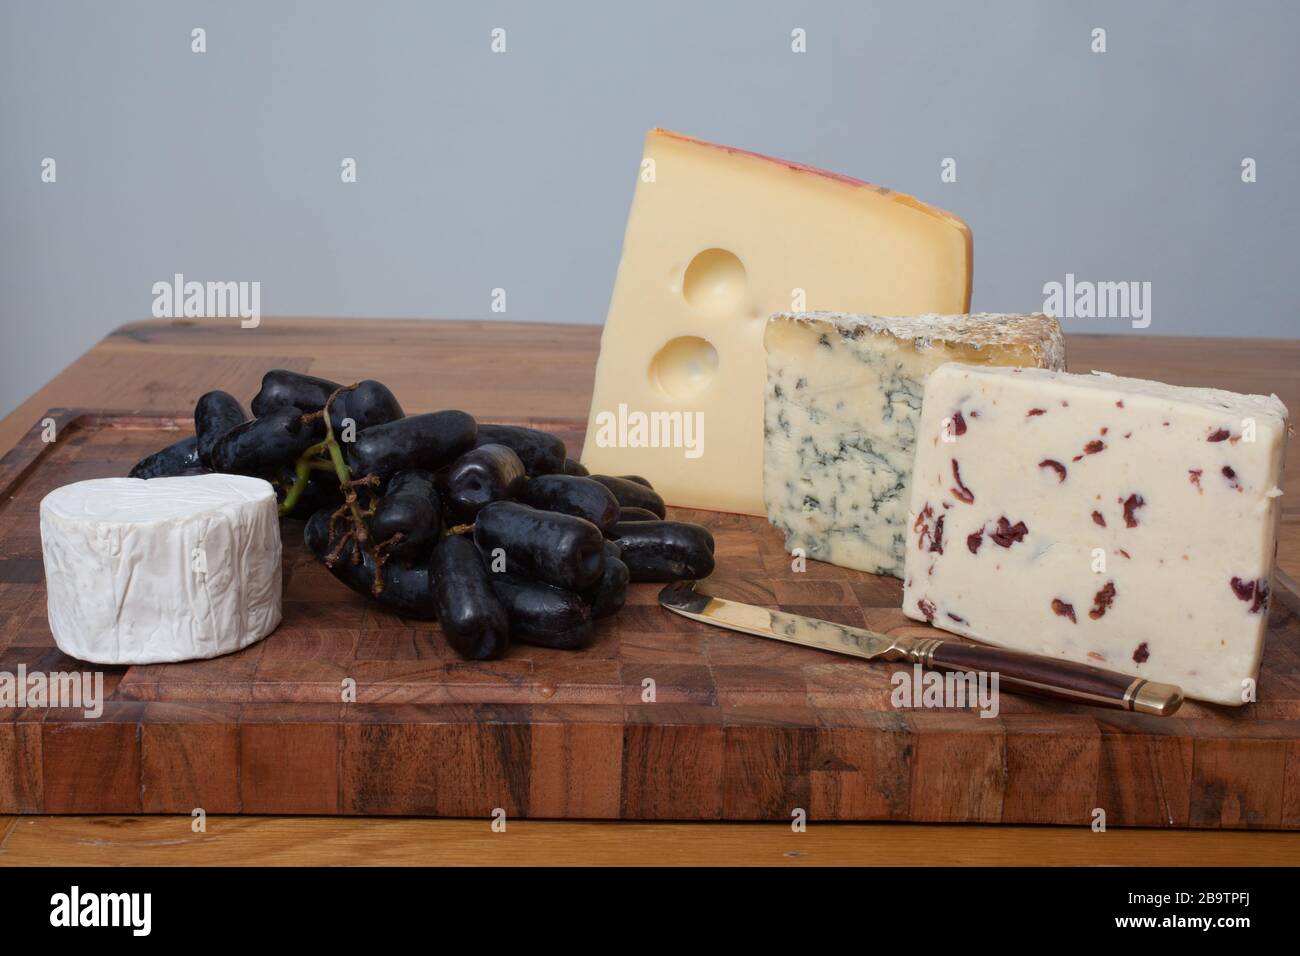 Wensleydale, Stilton, Jarlsberg and goat's cheese with black long grapes on a chopping board Stock Photo